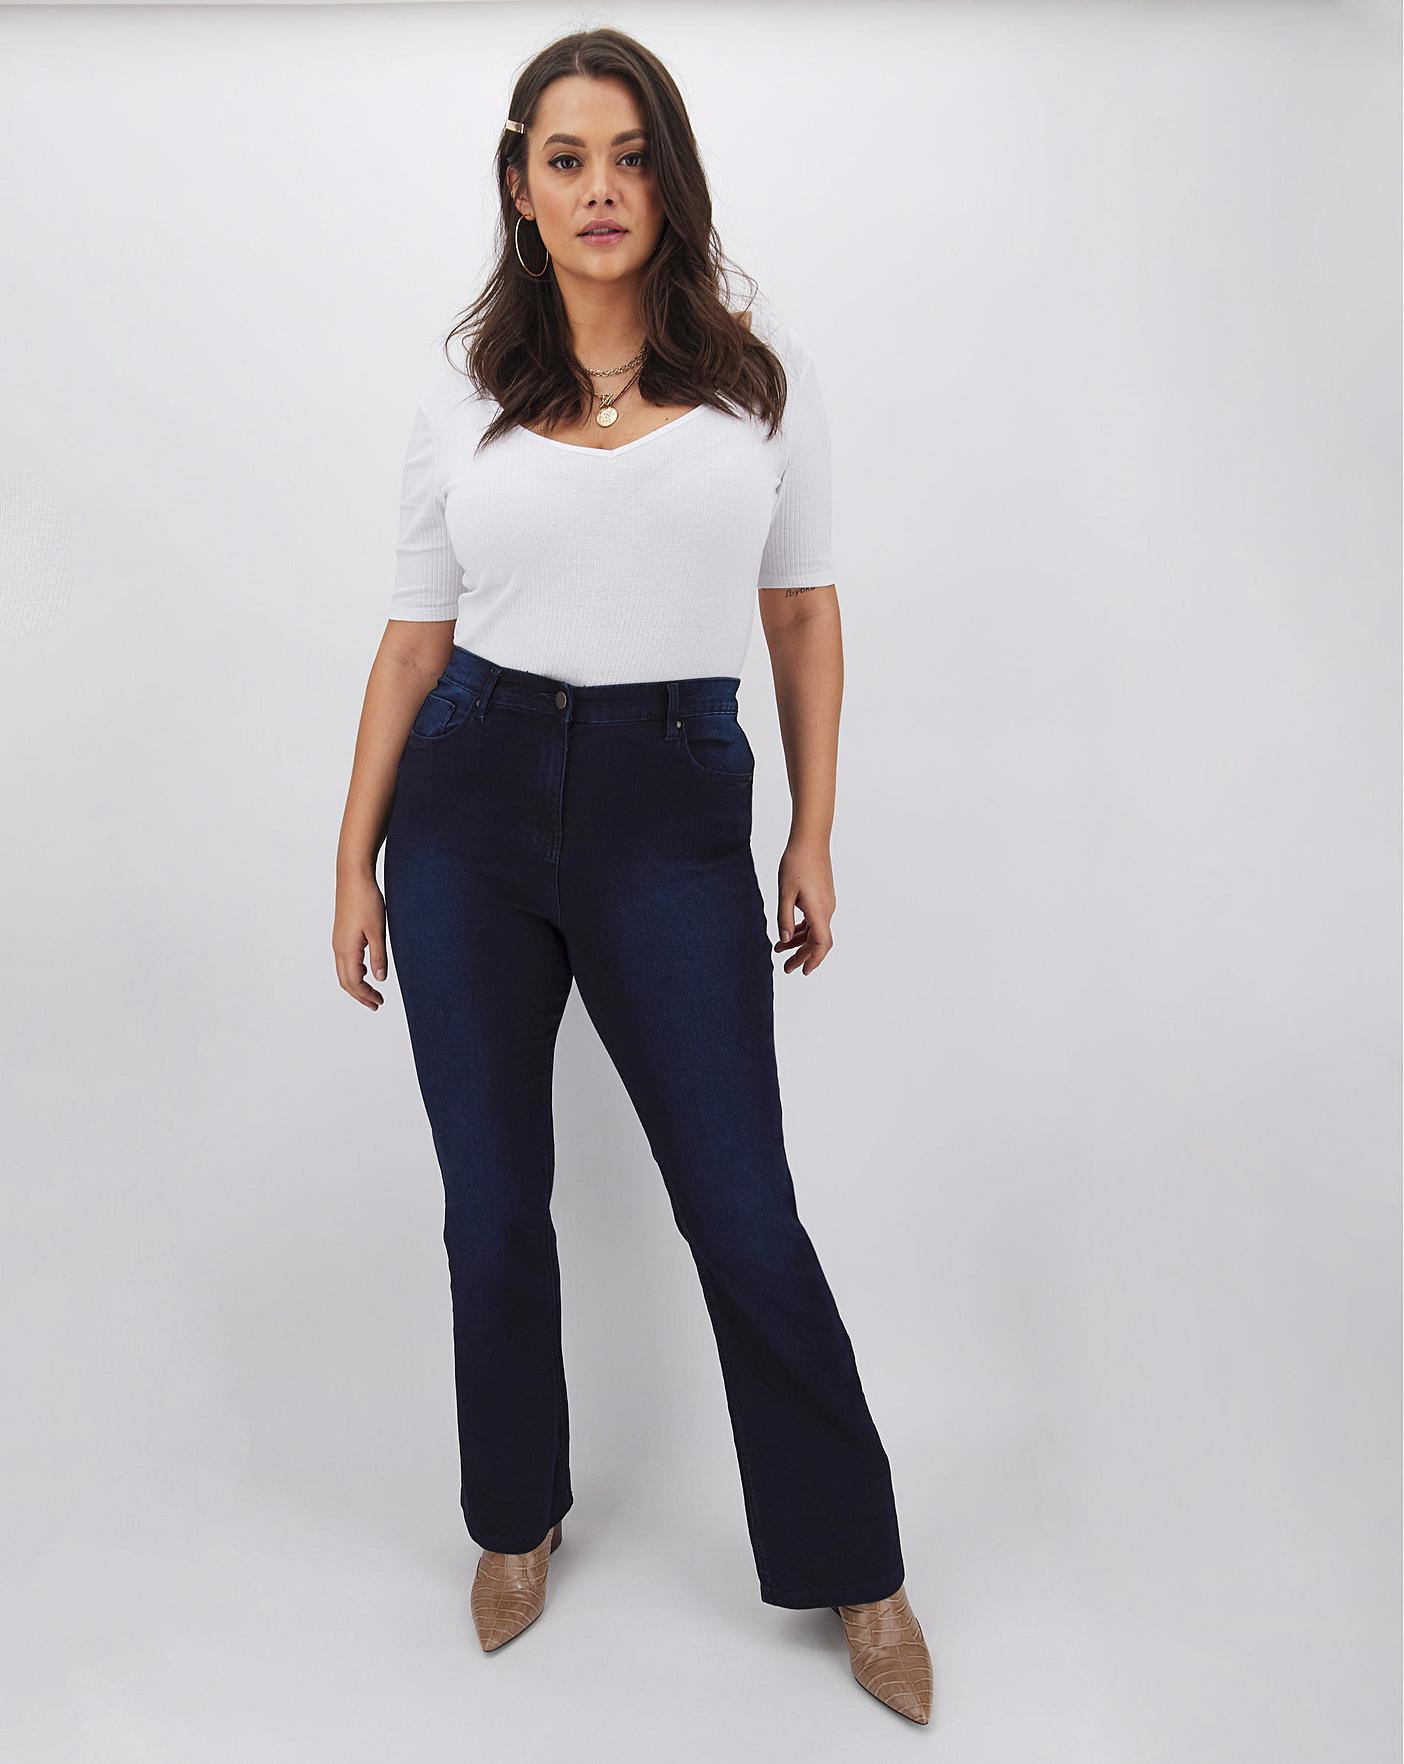 super high waisted petite jeans